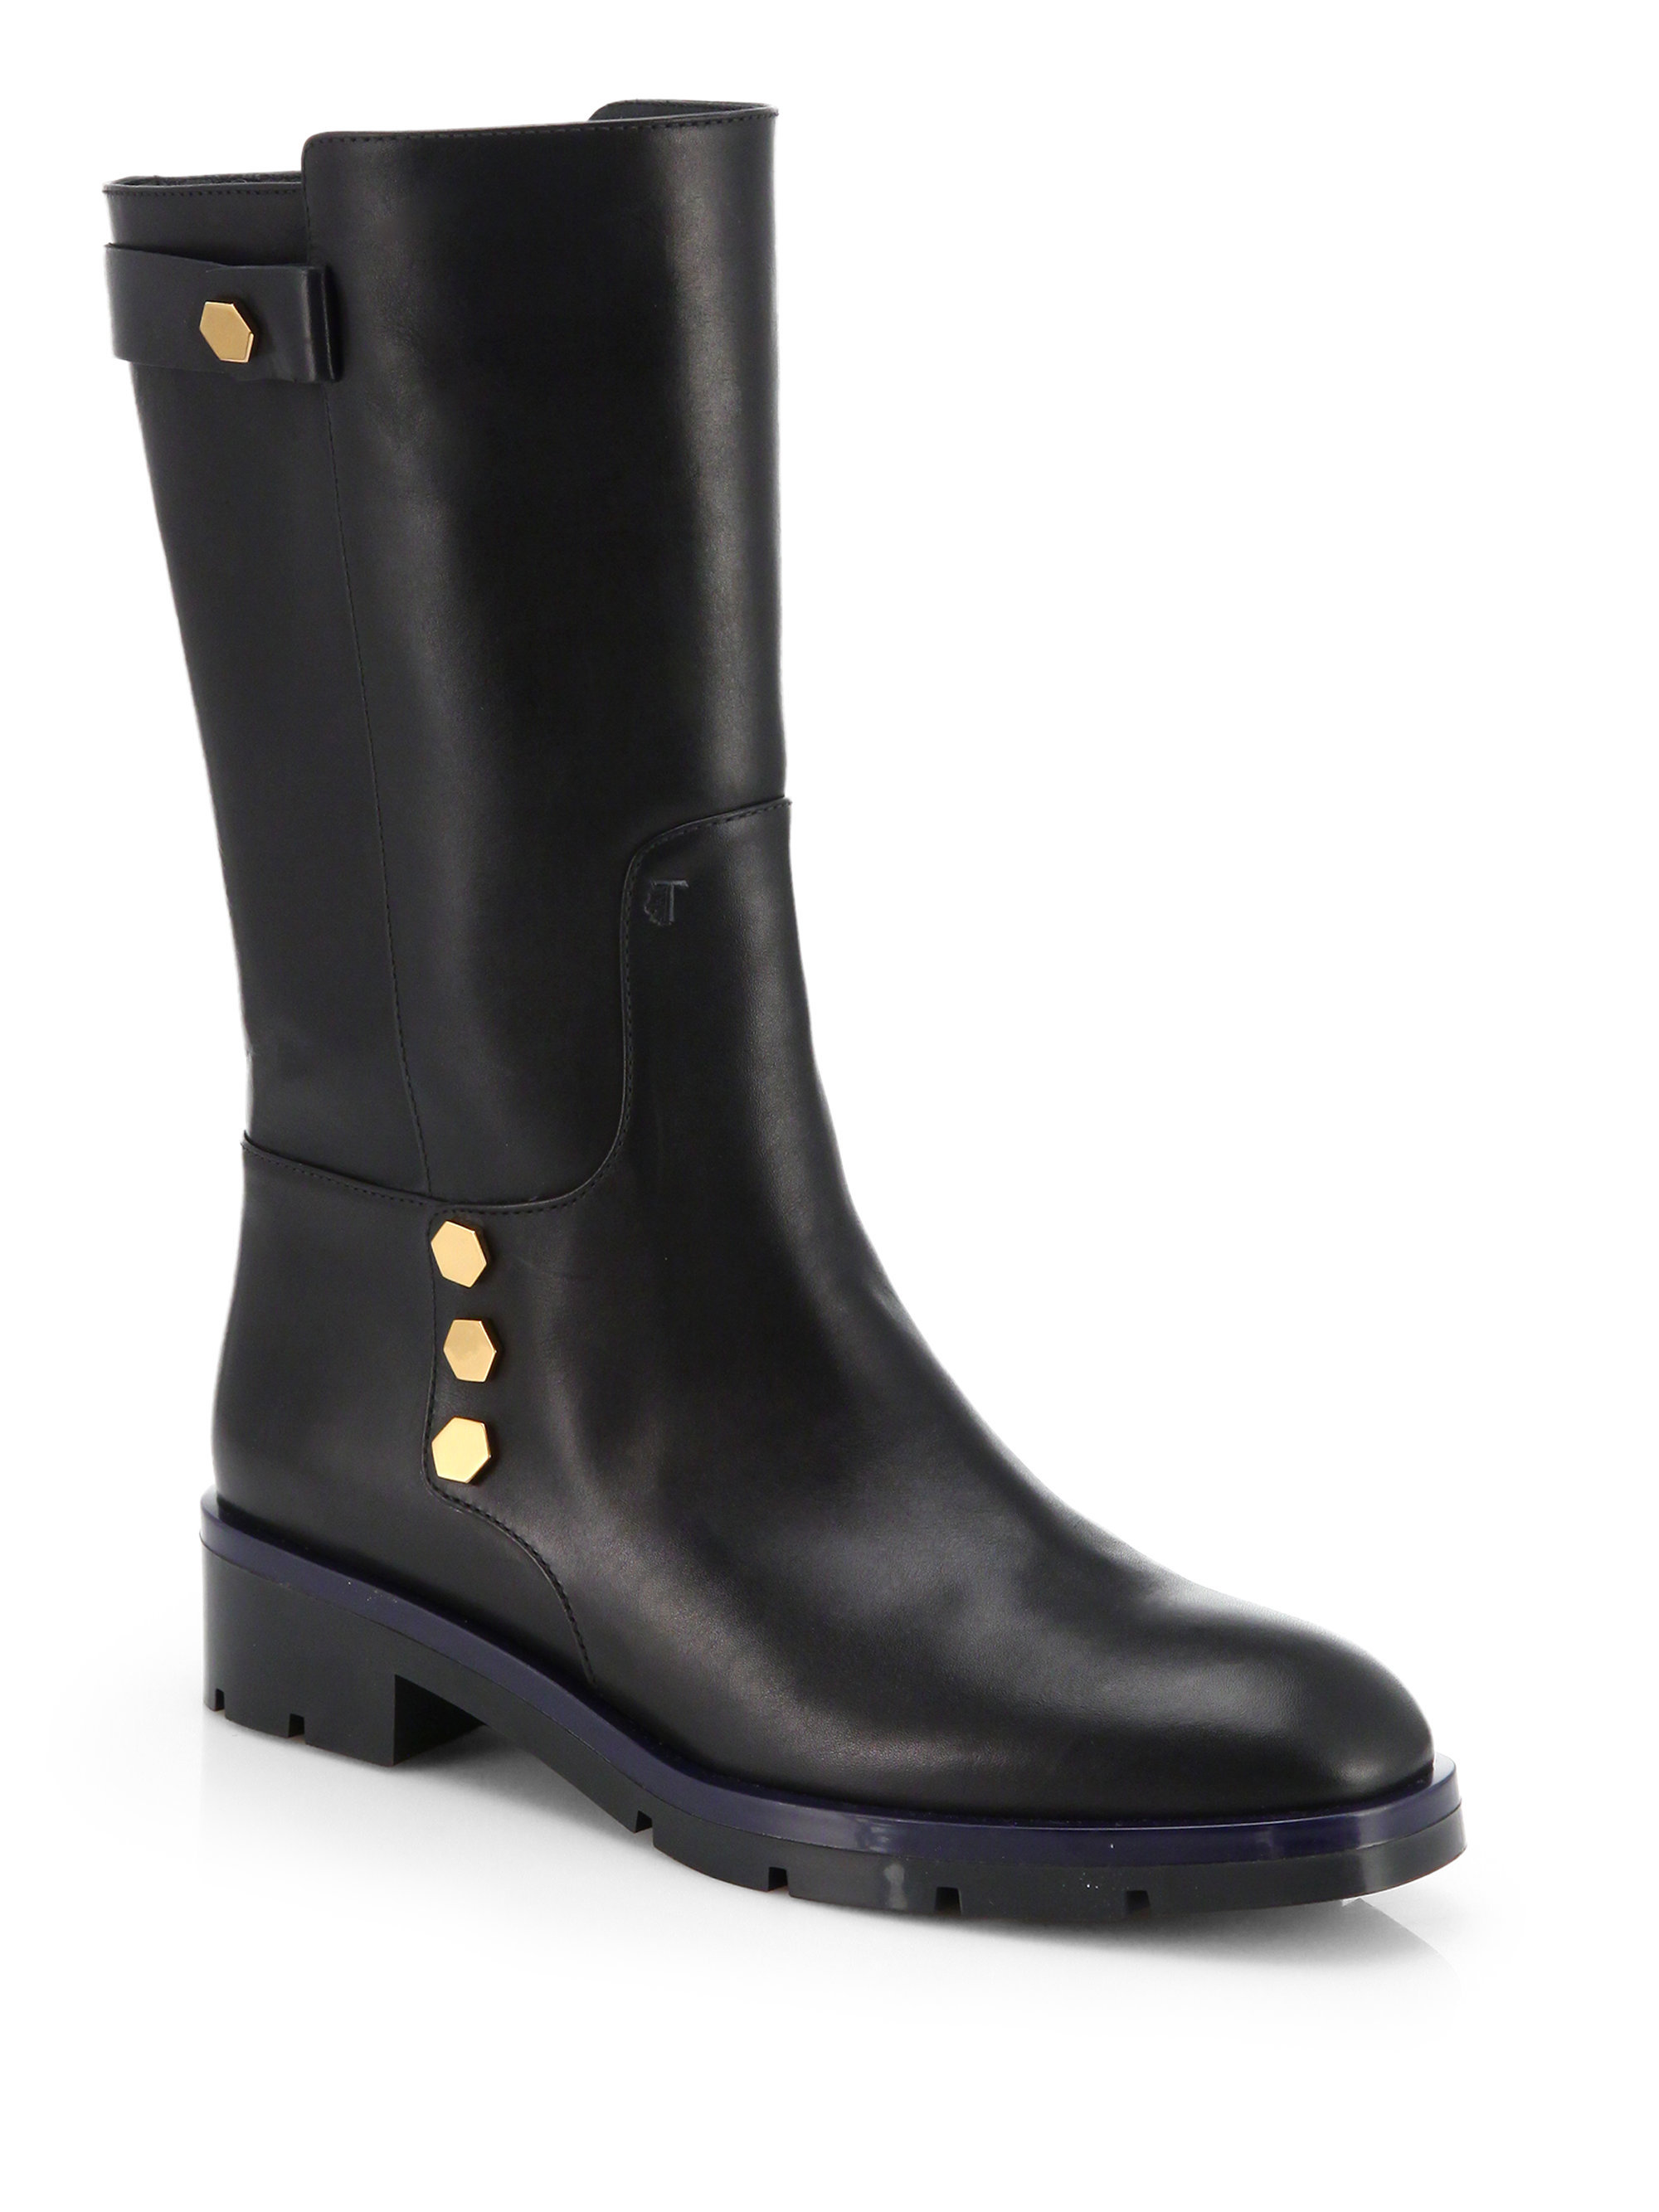 Lyst - Tod'S Flat Mate Leather Mid-Calf Boots in Black